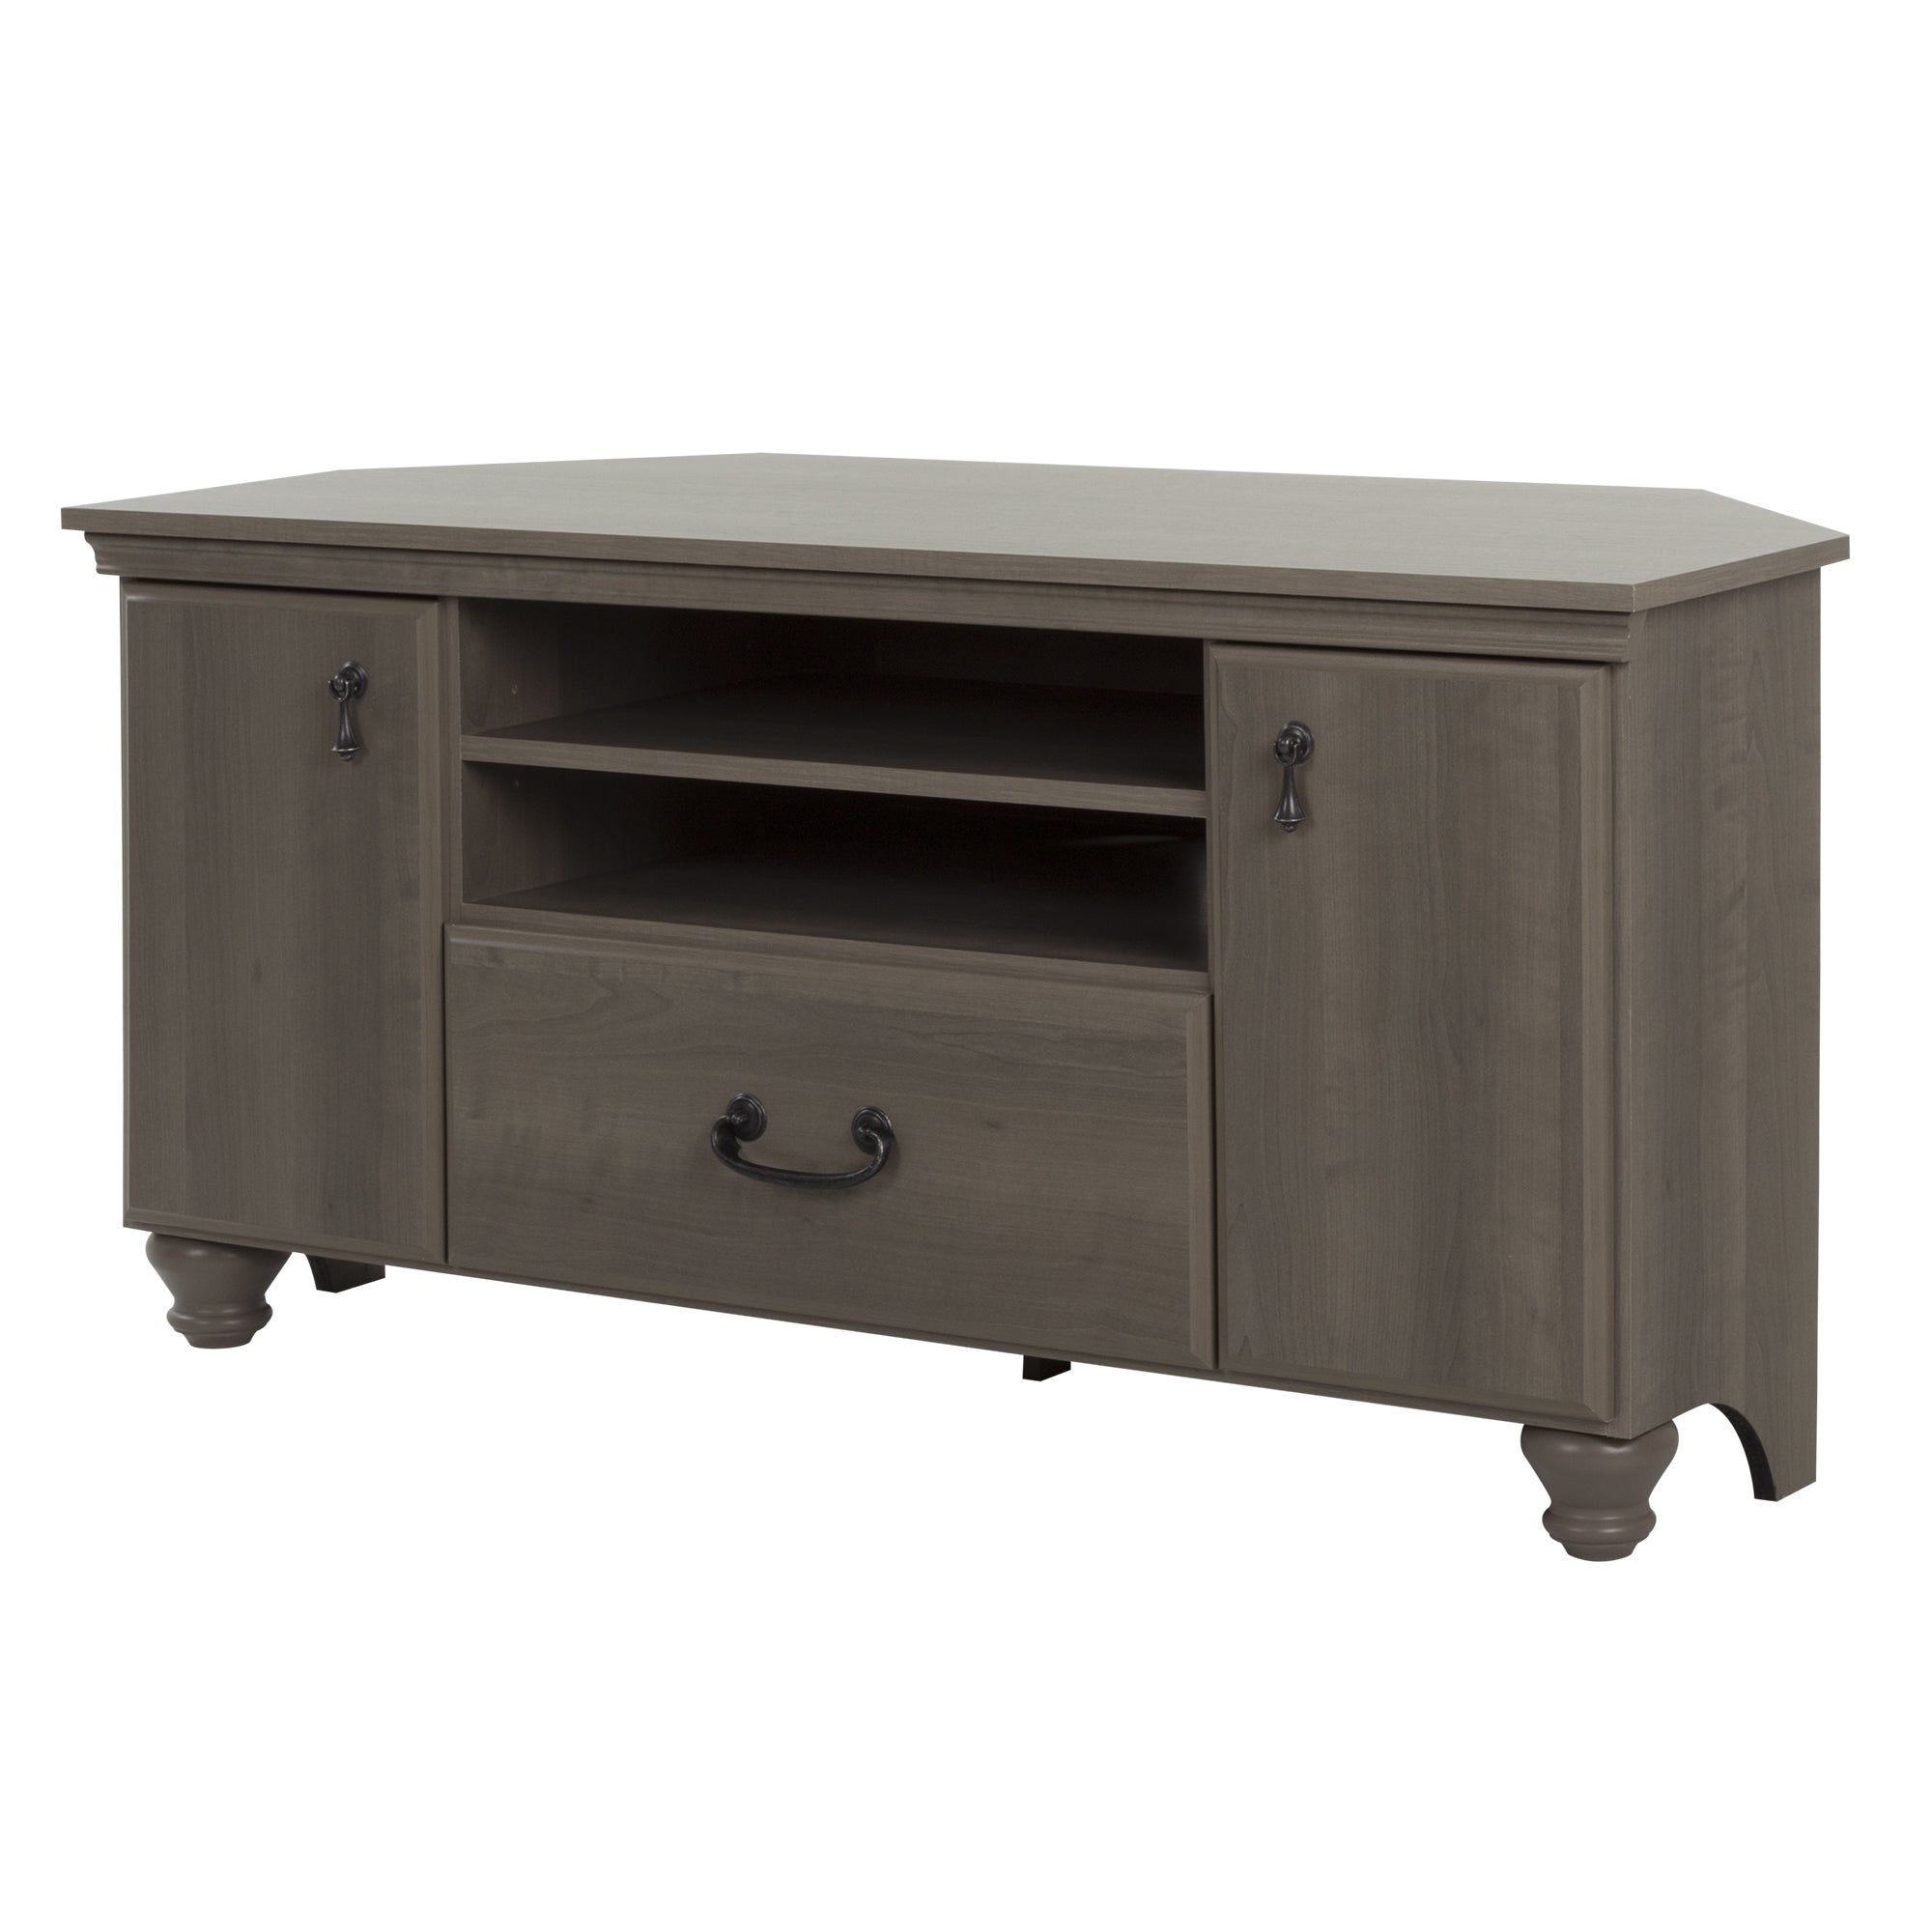 South Shore Grey Laminate Corner Tv Stand With Adjustable In Exhibit Corner Tv Stands (View 9 of 15)